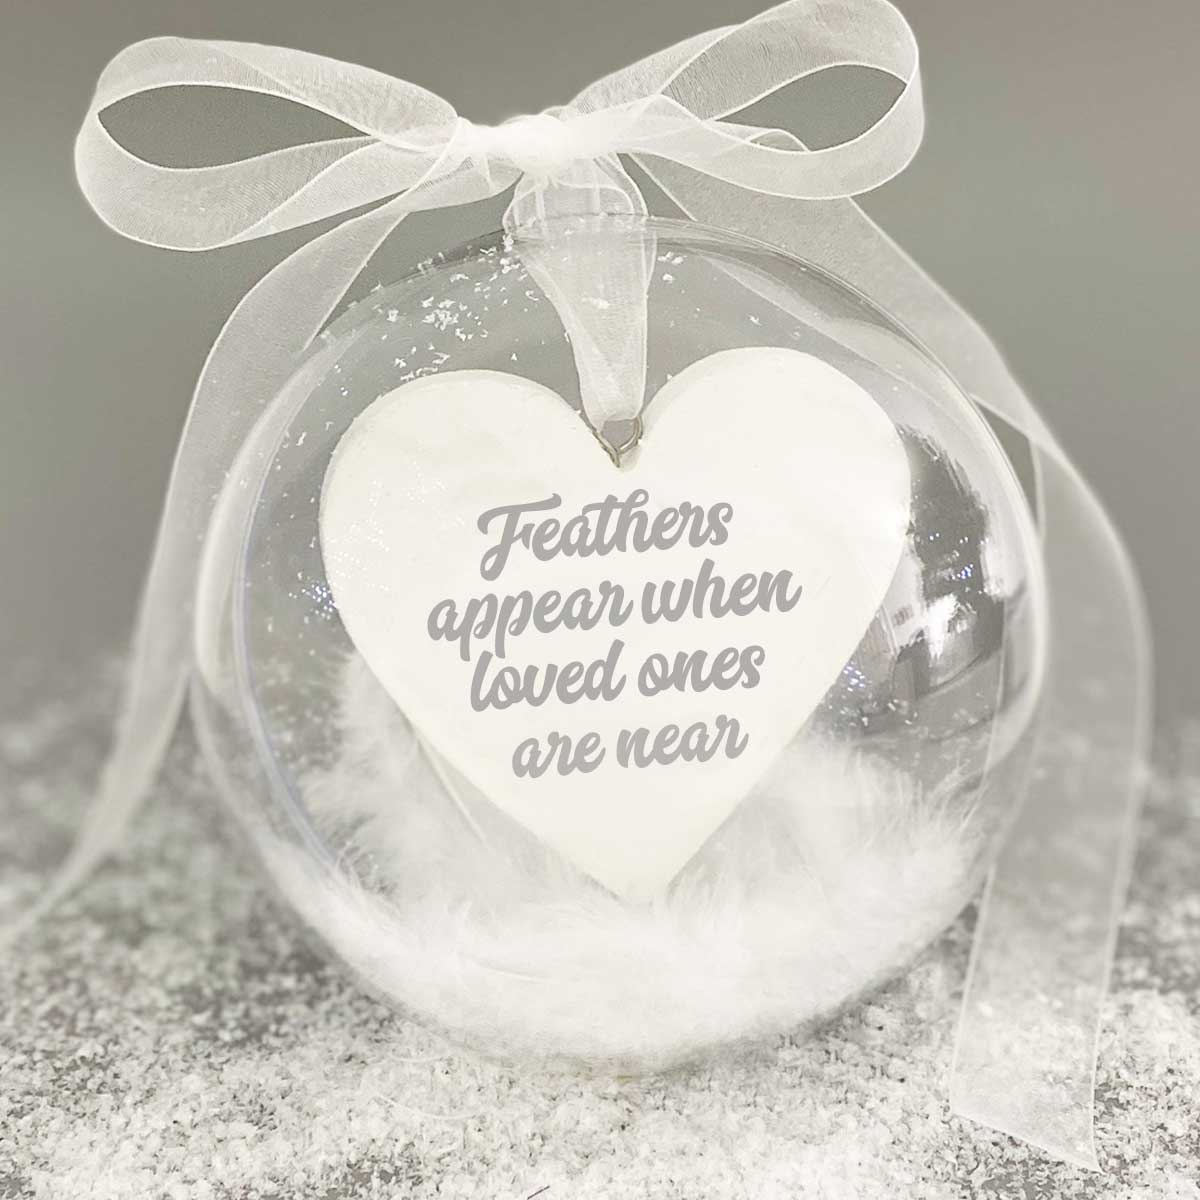 Personalised "Feathers appear when loved ones are near" Memorial Bauble - Mum or Dad